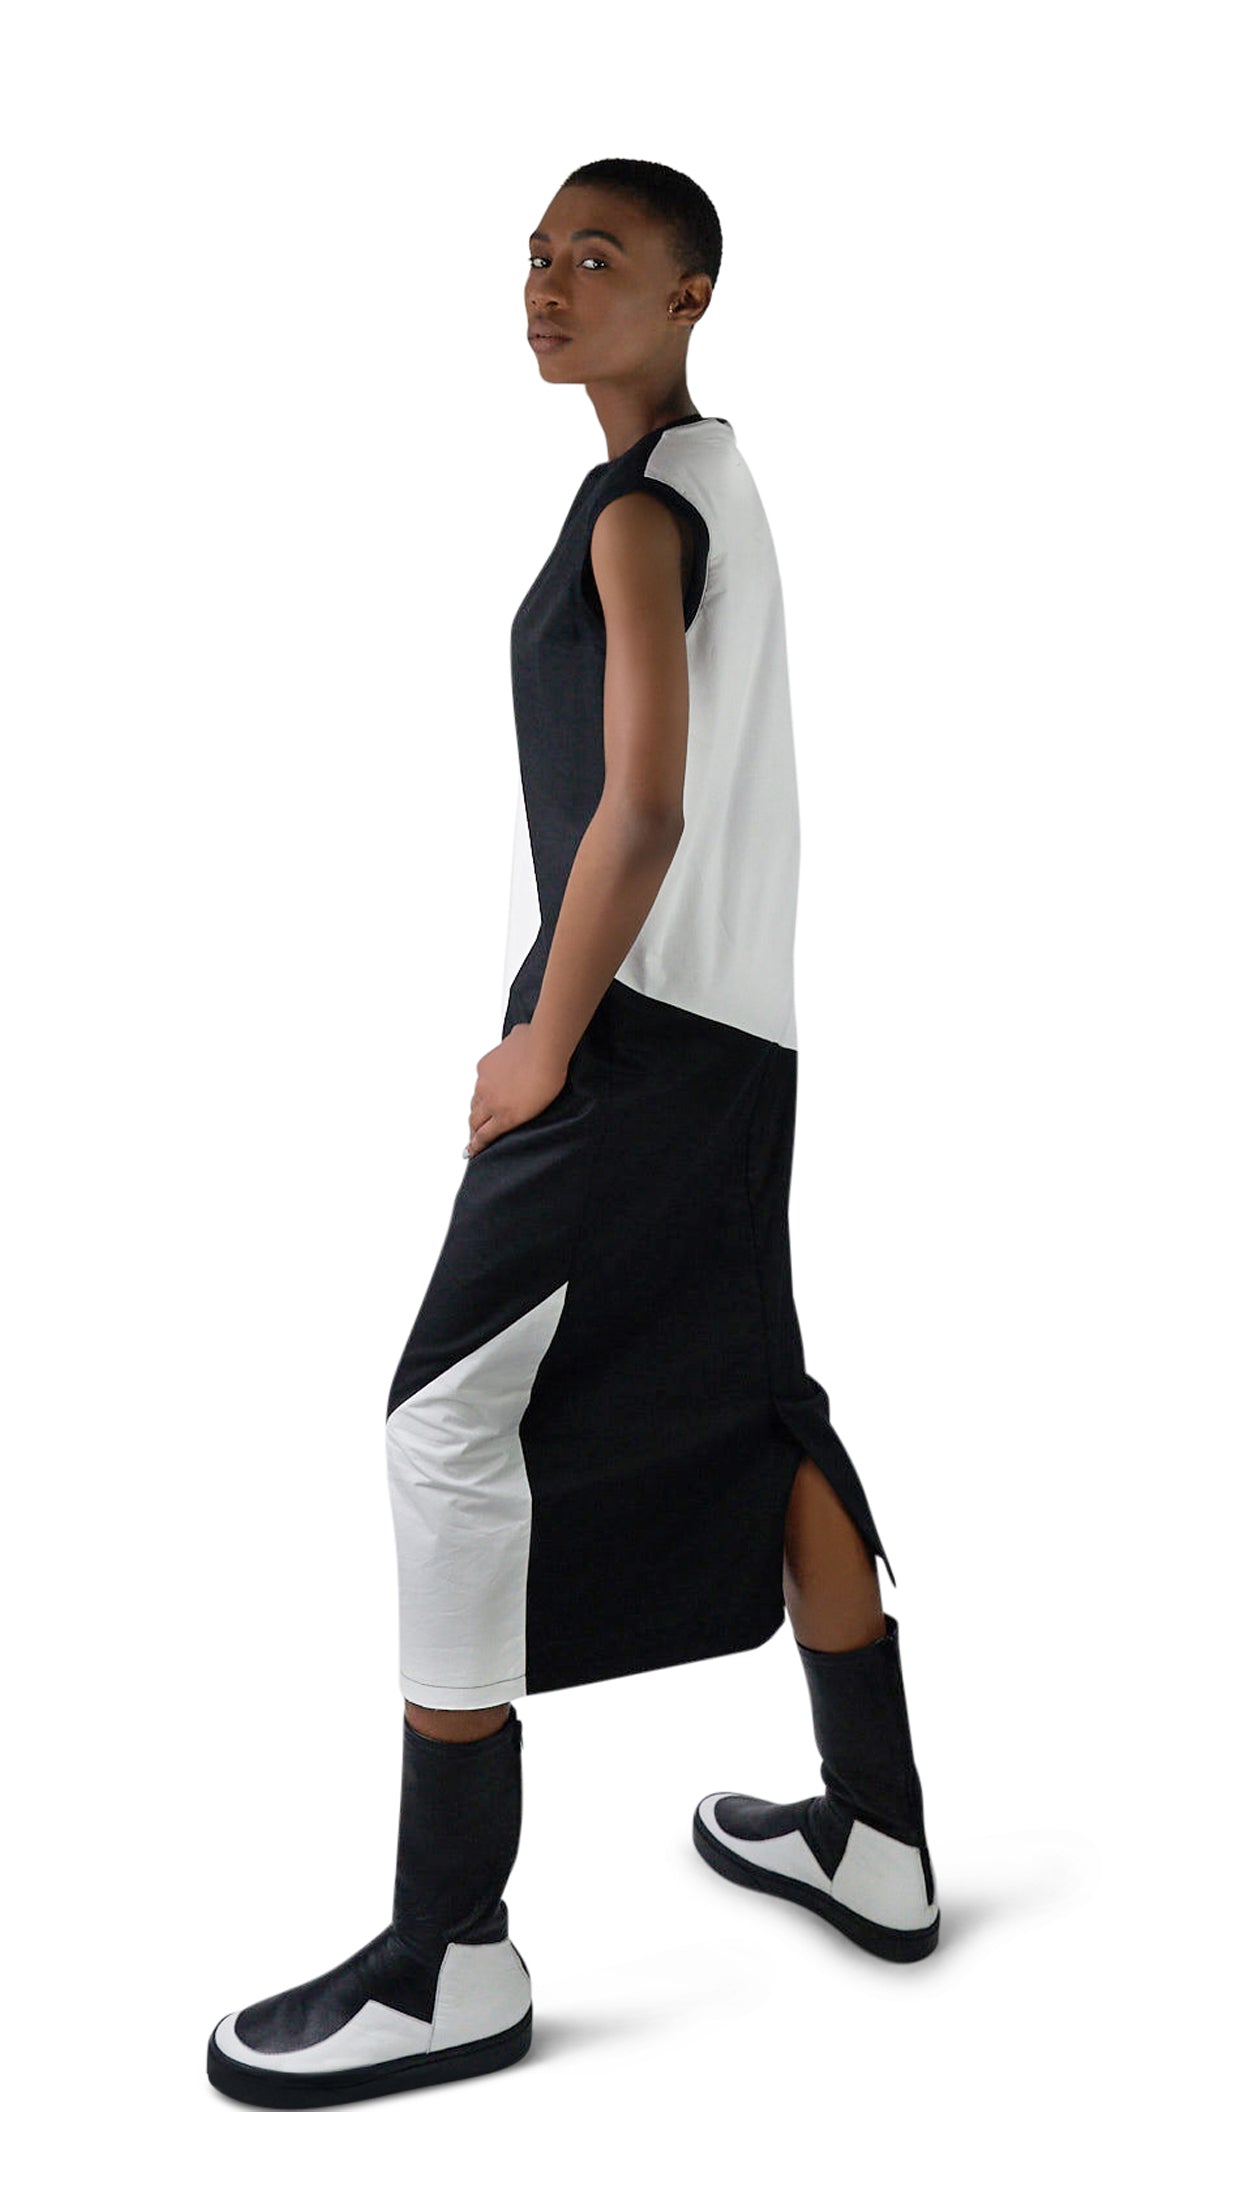 LOCO ONE ACHROMATIC COLLECTION.  DESIGN NUMERO 02.  Unisex dress made with natural materials only. Main composition is COTTON with neckline and sleeves details made of BAMBOO. Asymmetrical cuts, Futuristic look. Raw finishes on the front hem and a split in the back with a detailed, finished hem. Loose fit.